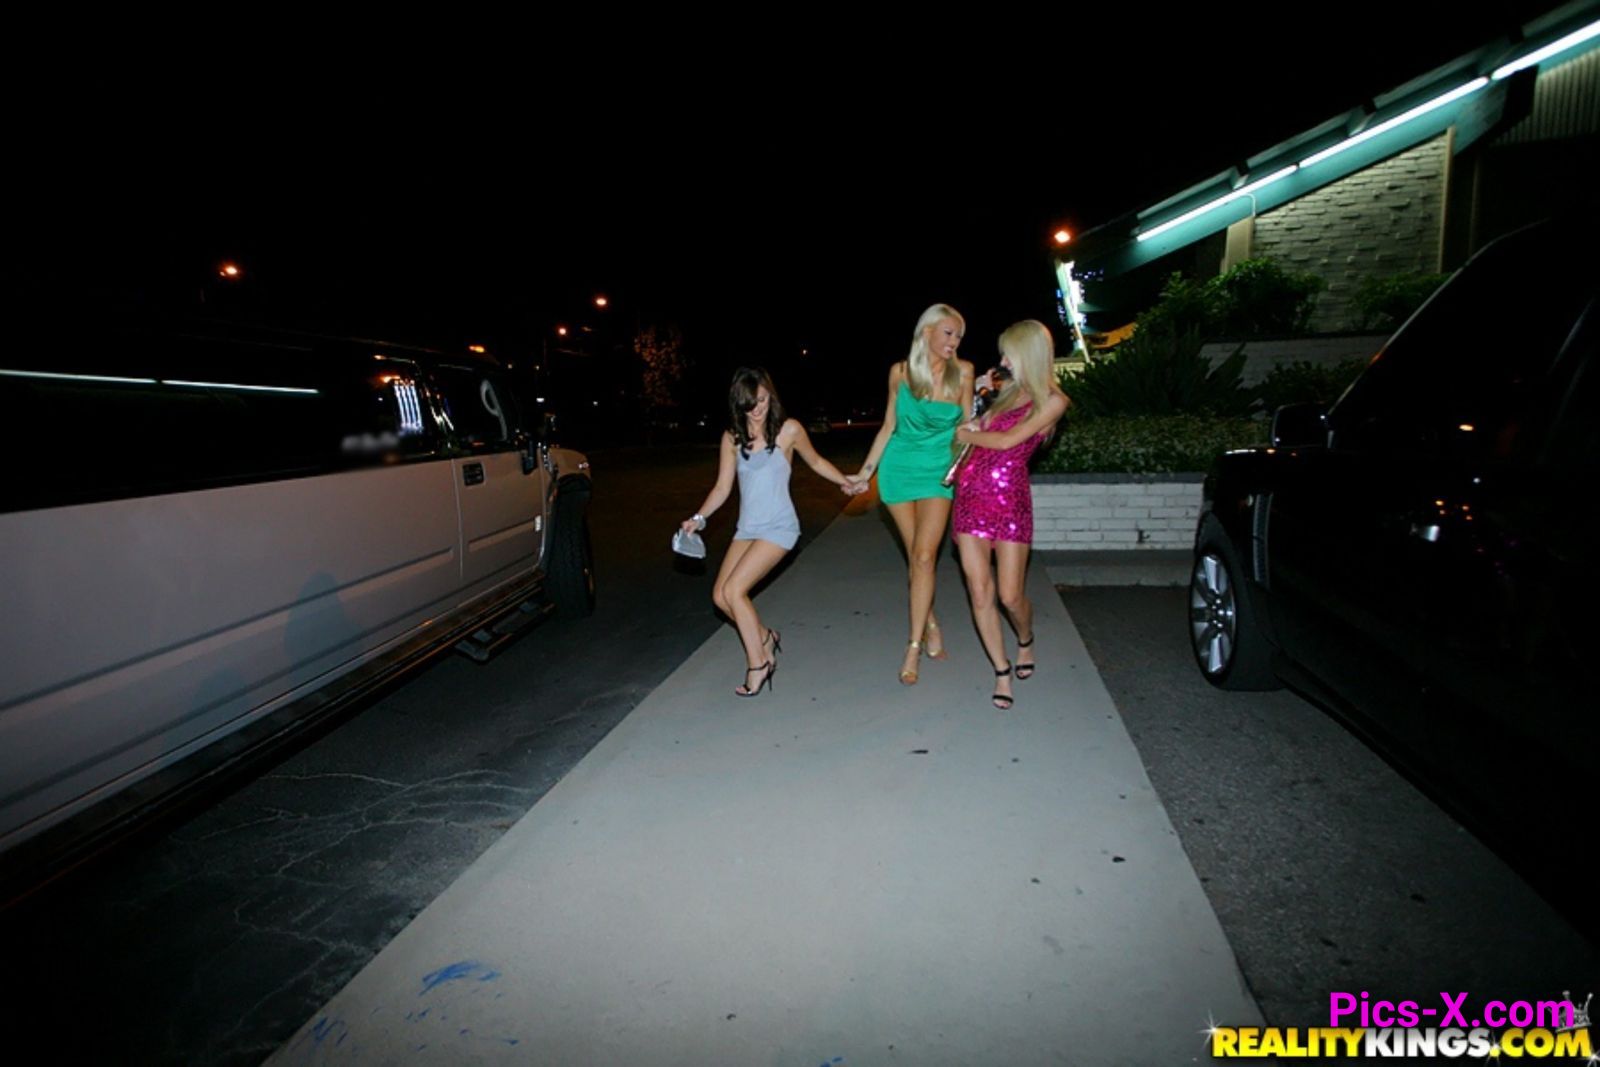 Licked In The Limo - We Live Together - Image 24